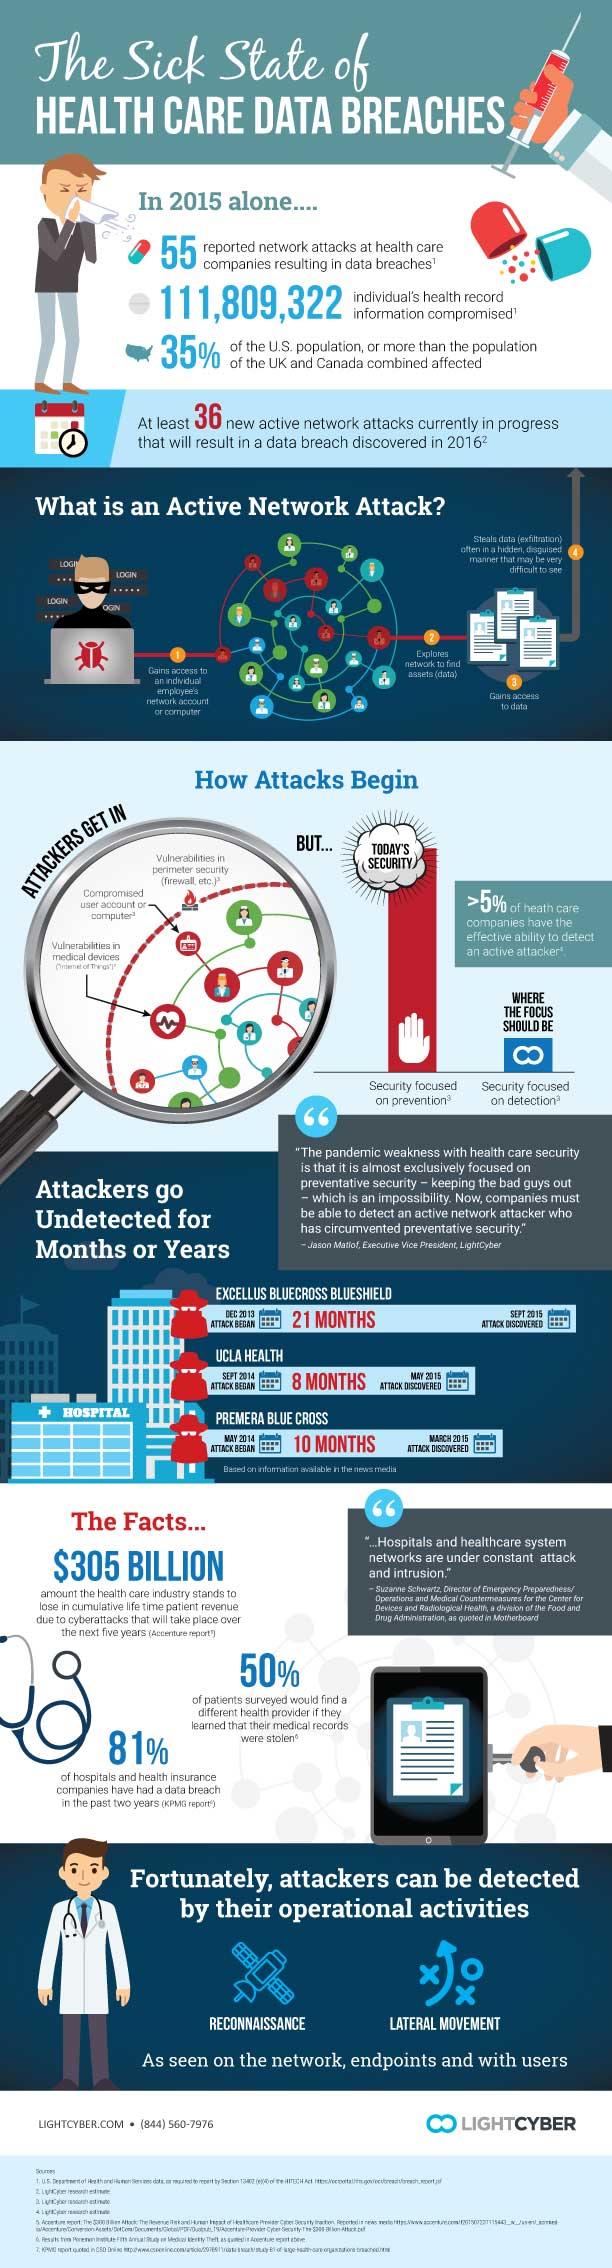 The Sick State of Healthcare Data Breaches Infographic